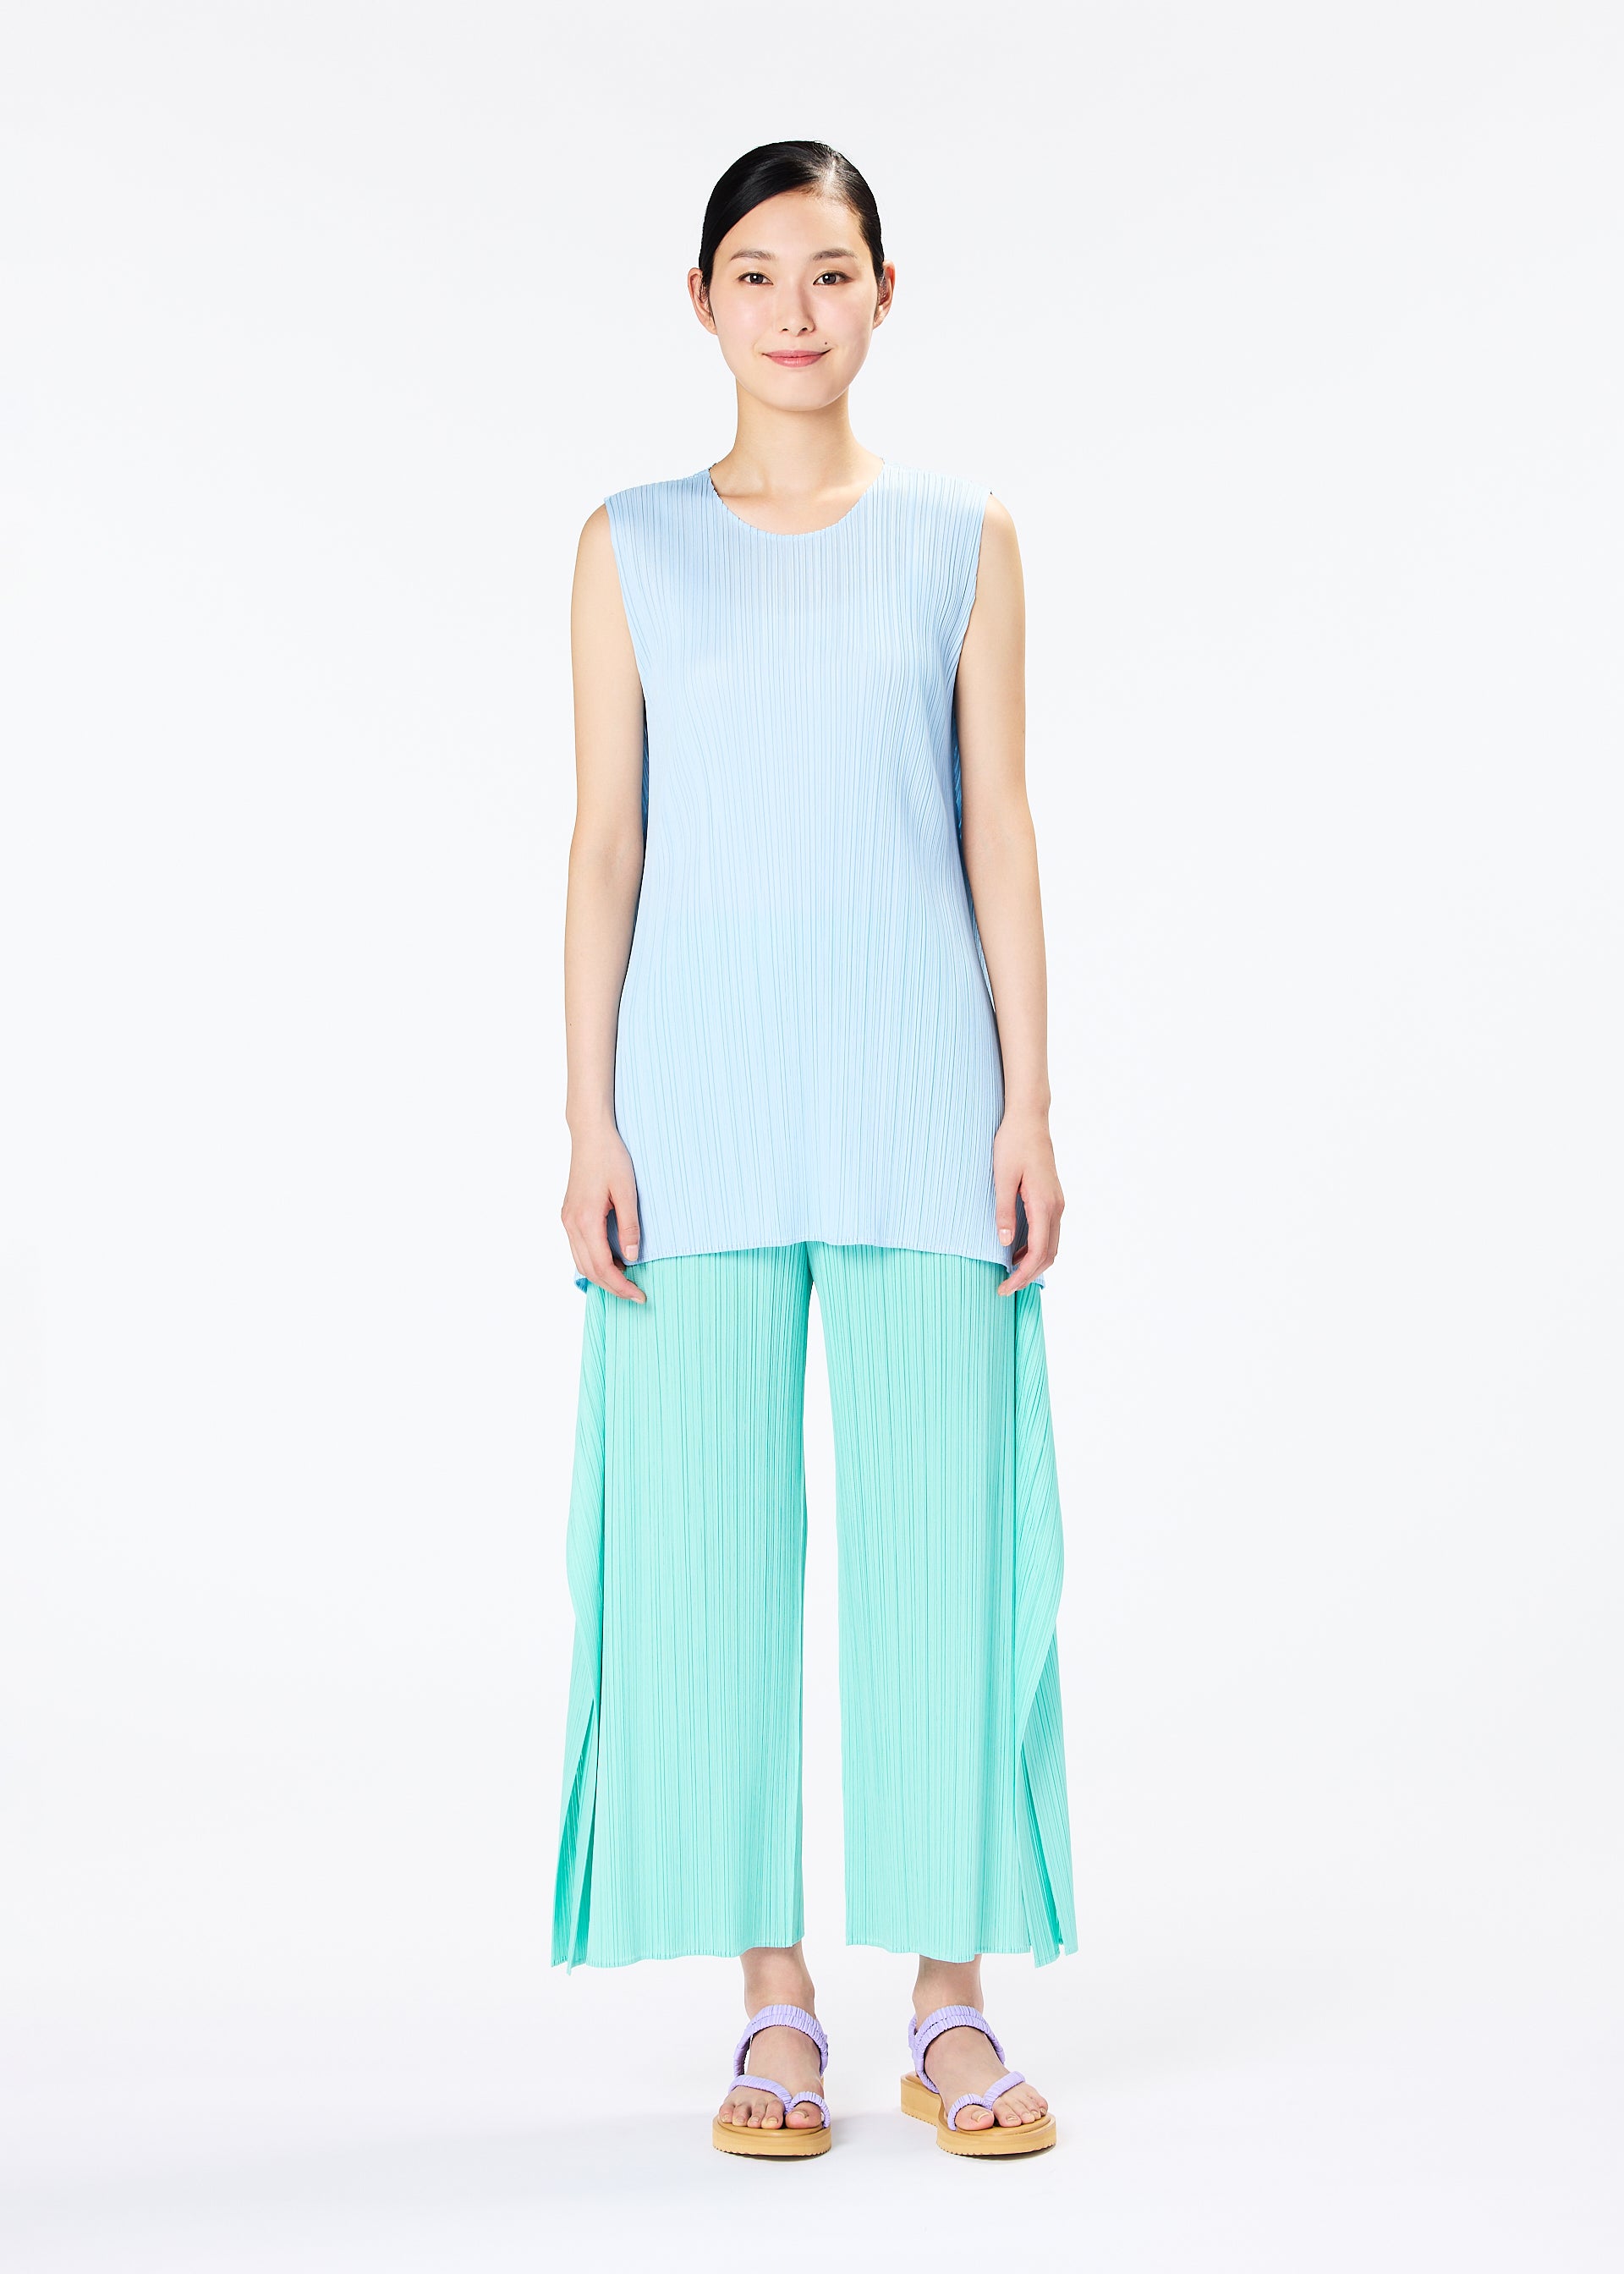 MONTHLY COLORS : JUNE – isseymiyake.com